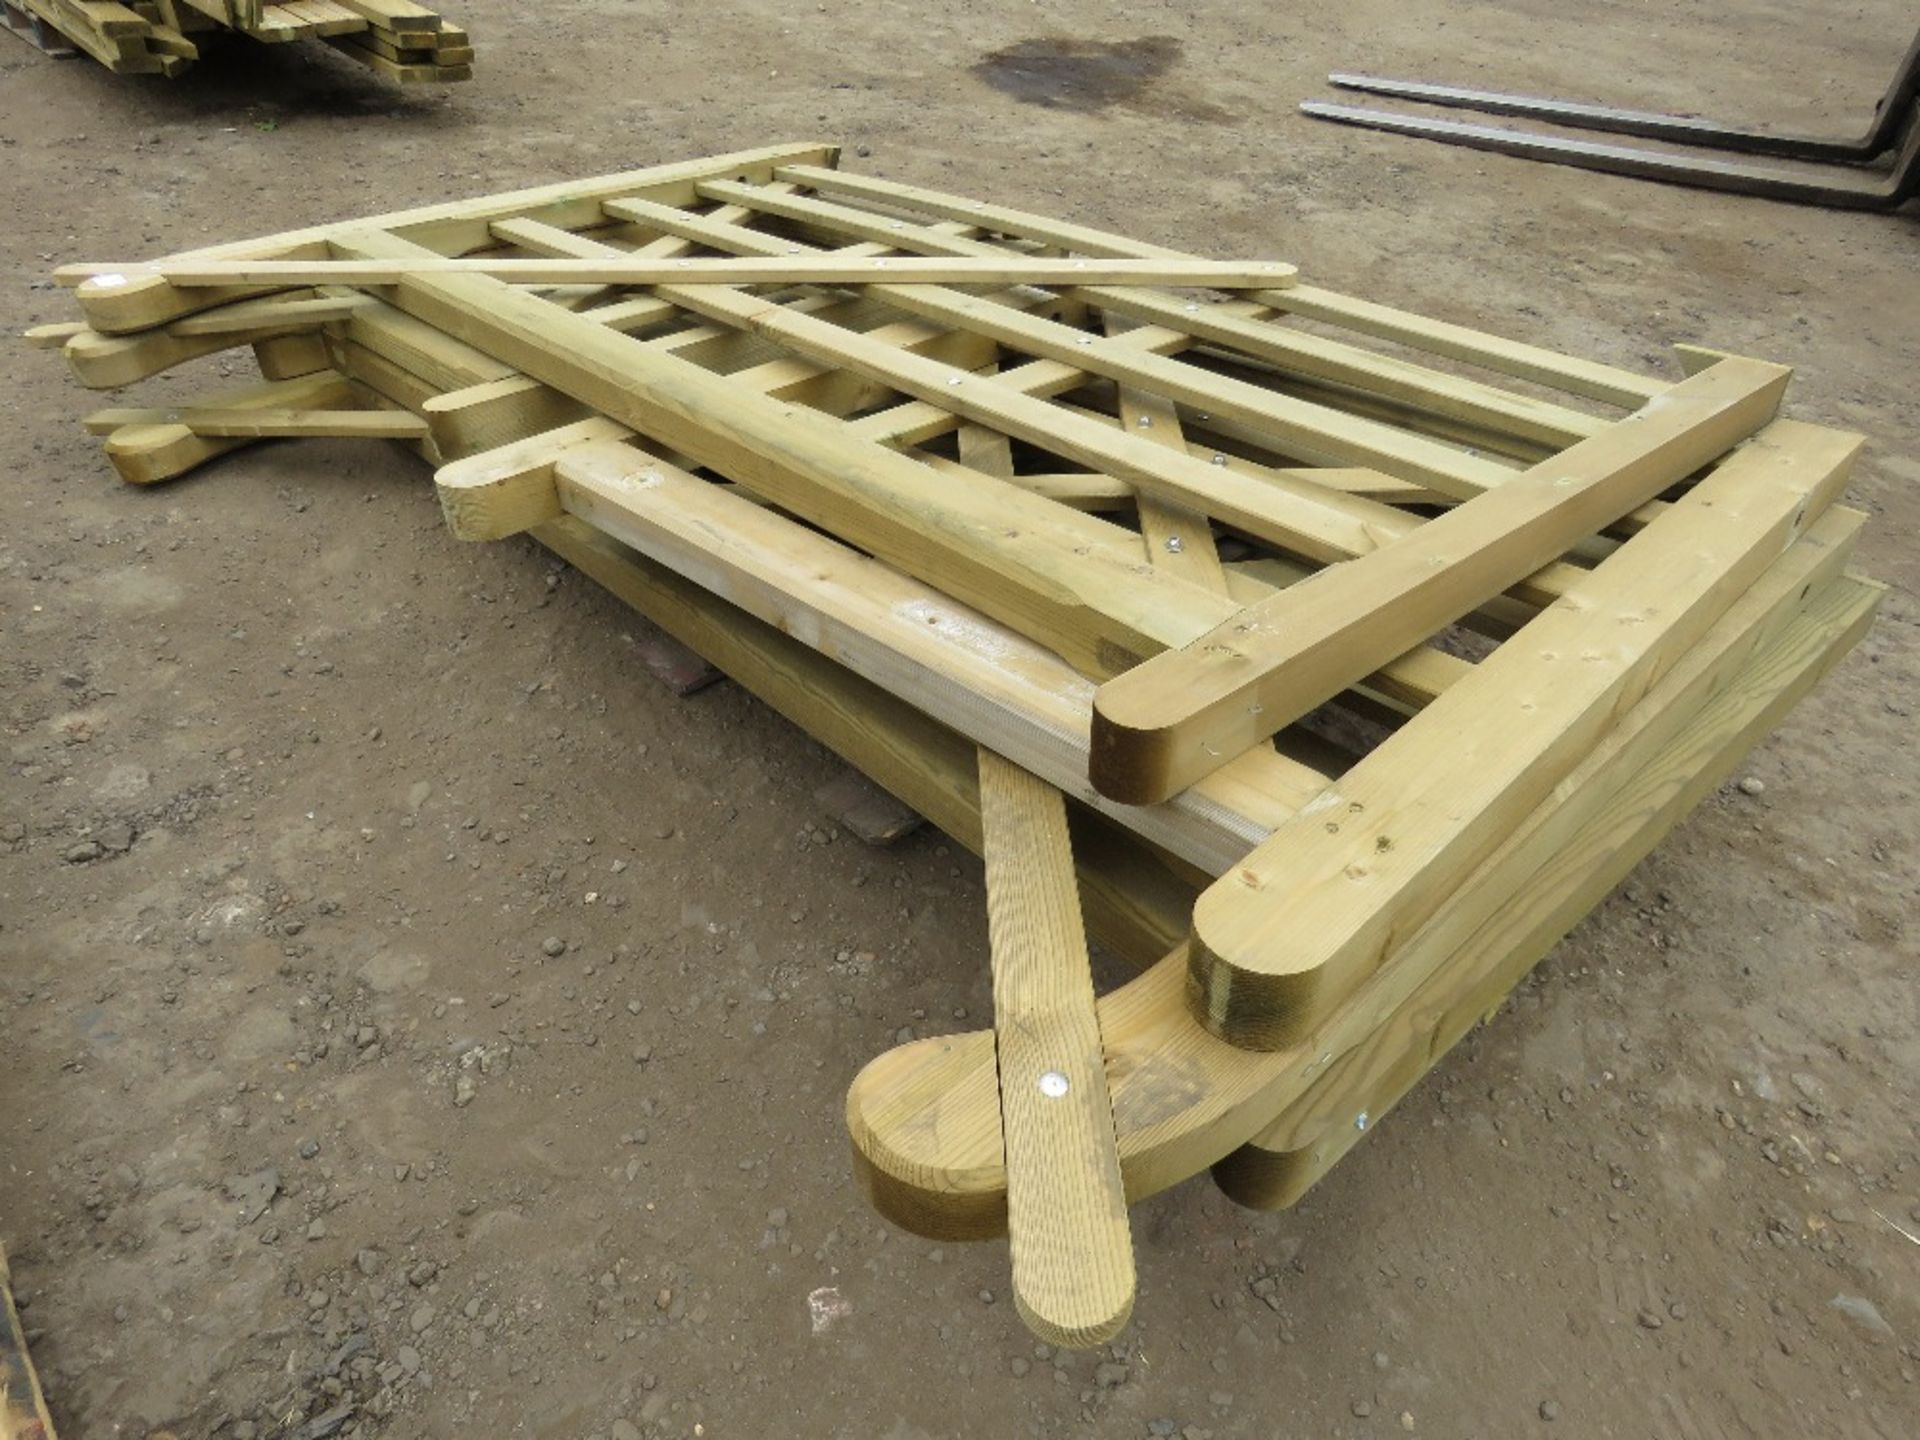 5 X ASSORTED SIZED WOODEN FIELD/DRIVEWAY GATES, AS SHOWN IN IMAGES - Image 5 of 6